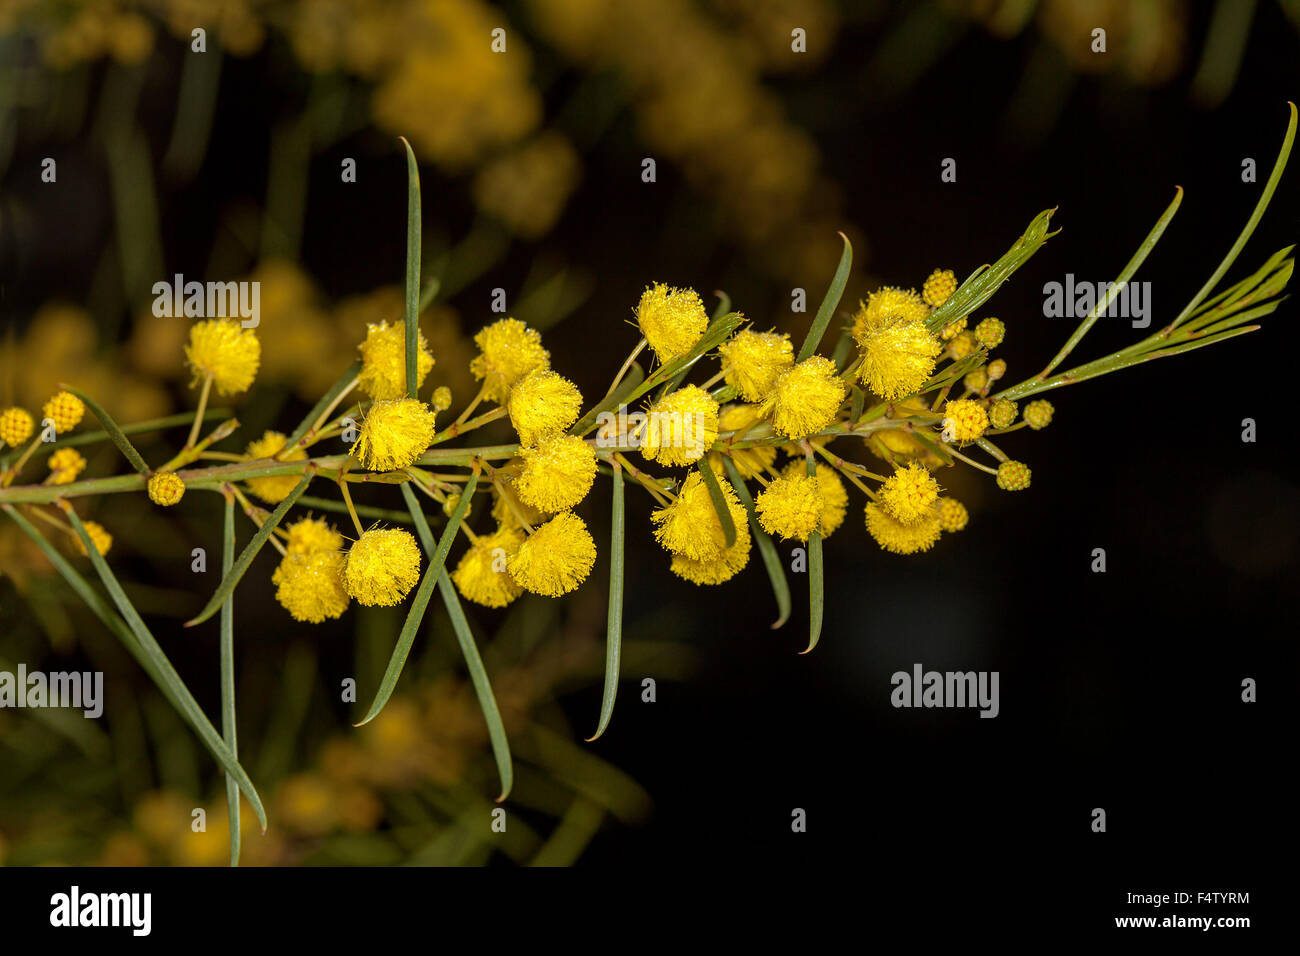 Golden yellow flowers and green leaves of Acacia elongata, swamp wattle, against dark background Stock Photo